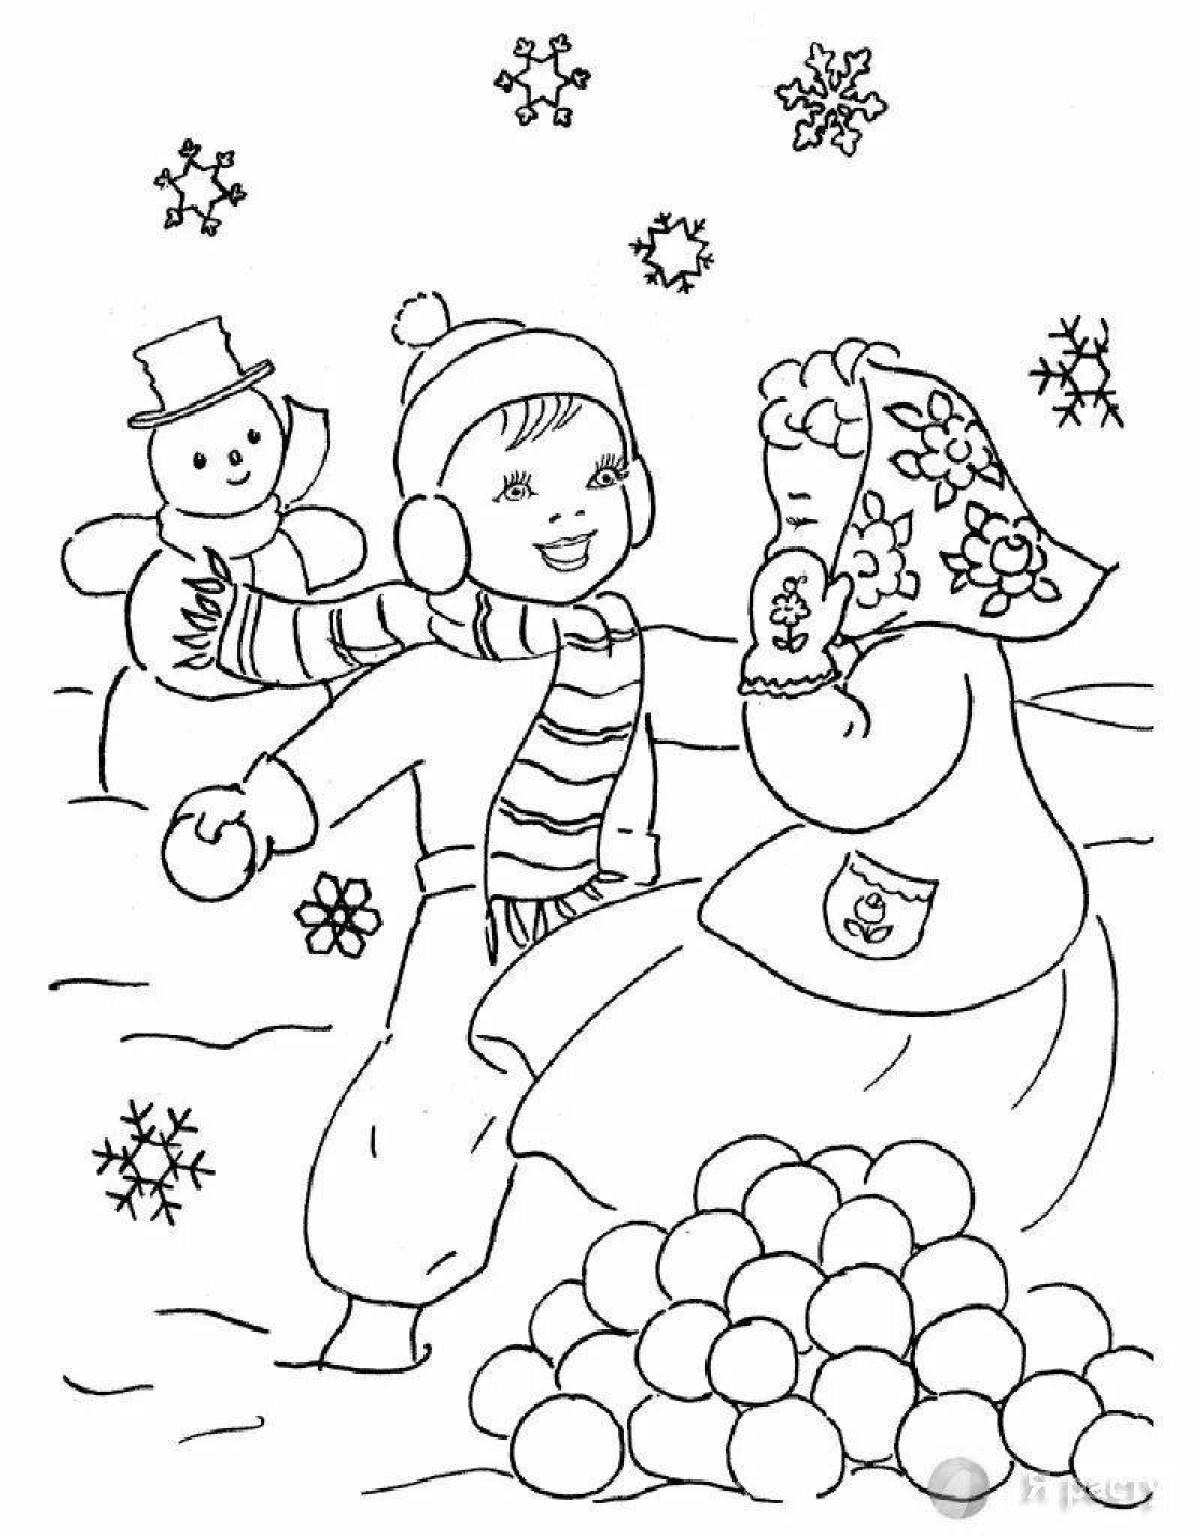 Adorable snowball fight coloring page